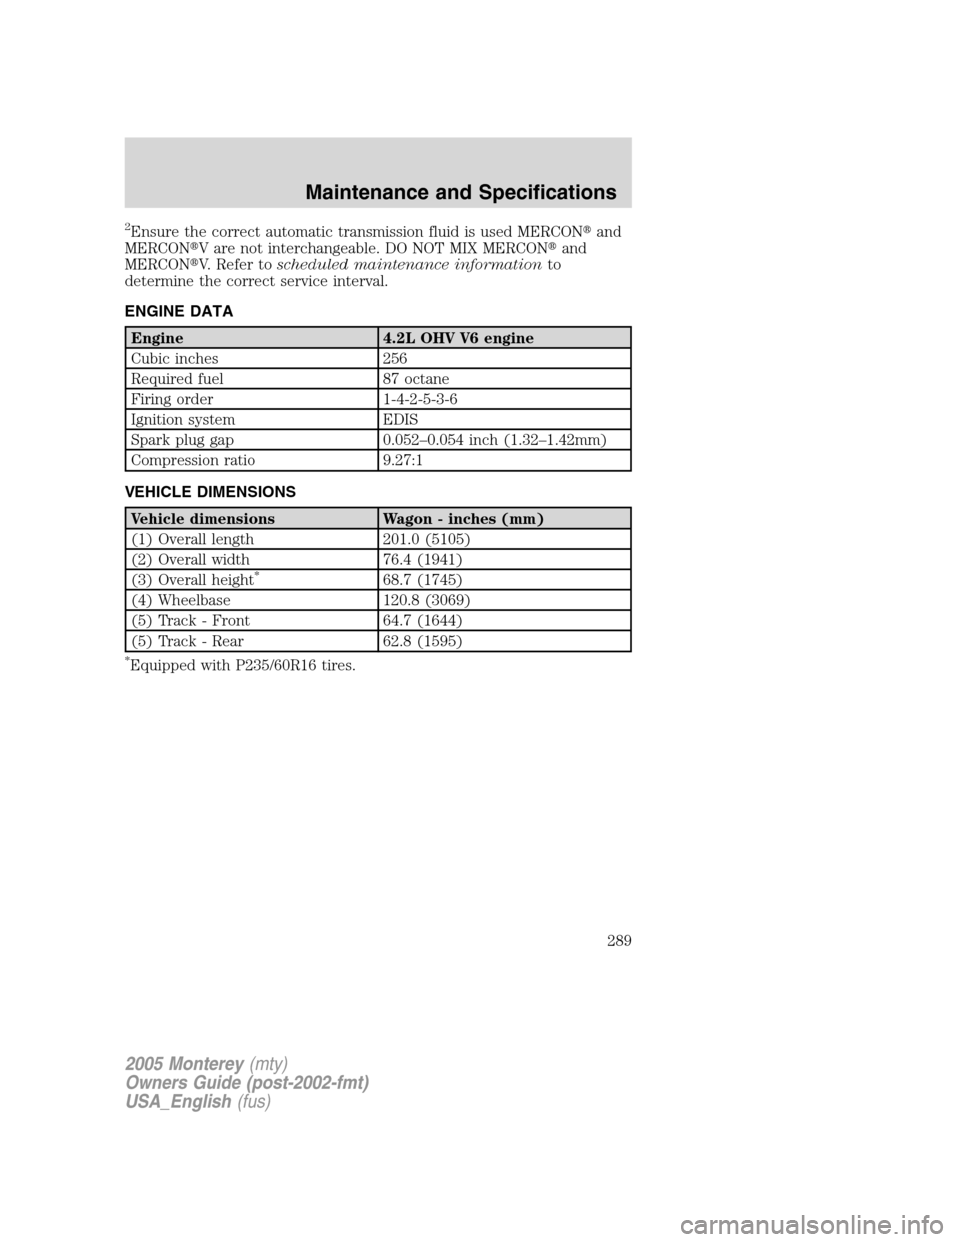 Mercury Monterey 2005  s Owners Guide 2Ensure the correct automatic transmission fluid is used MERCONand
MERCONV are not interchangeable. DO NOT MIX MERCONand
MERCONV. Refer toscheduled maintenance informationto
determine the correct 